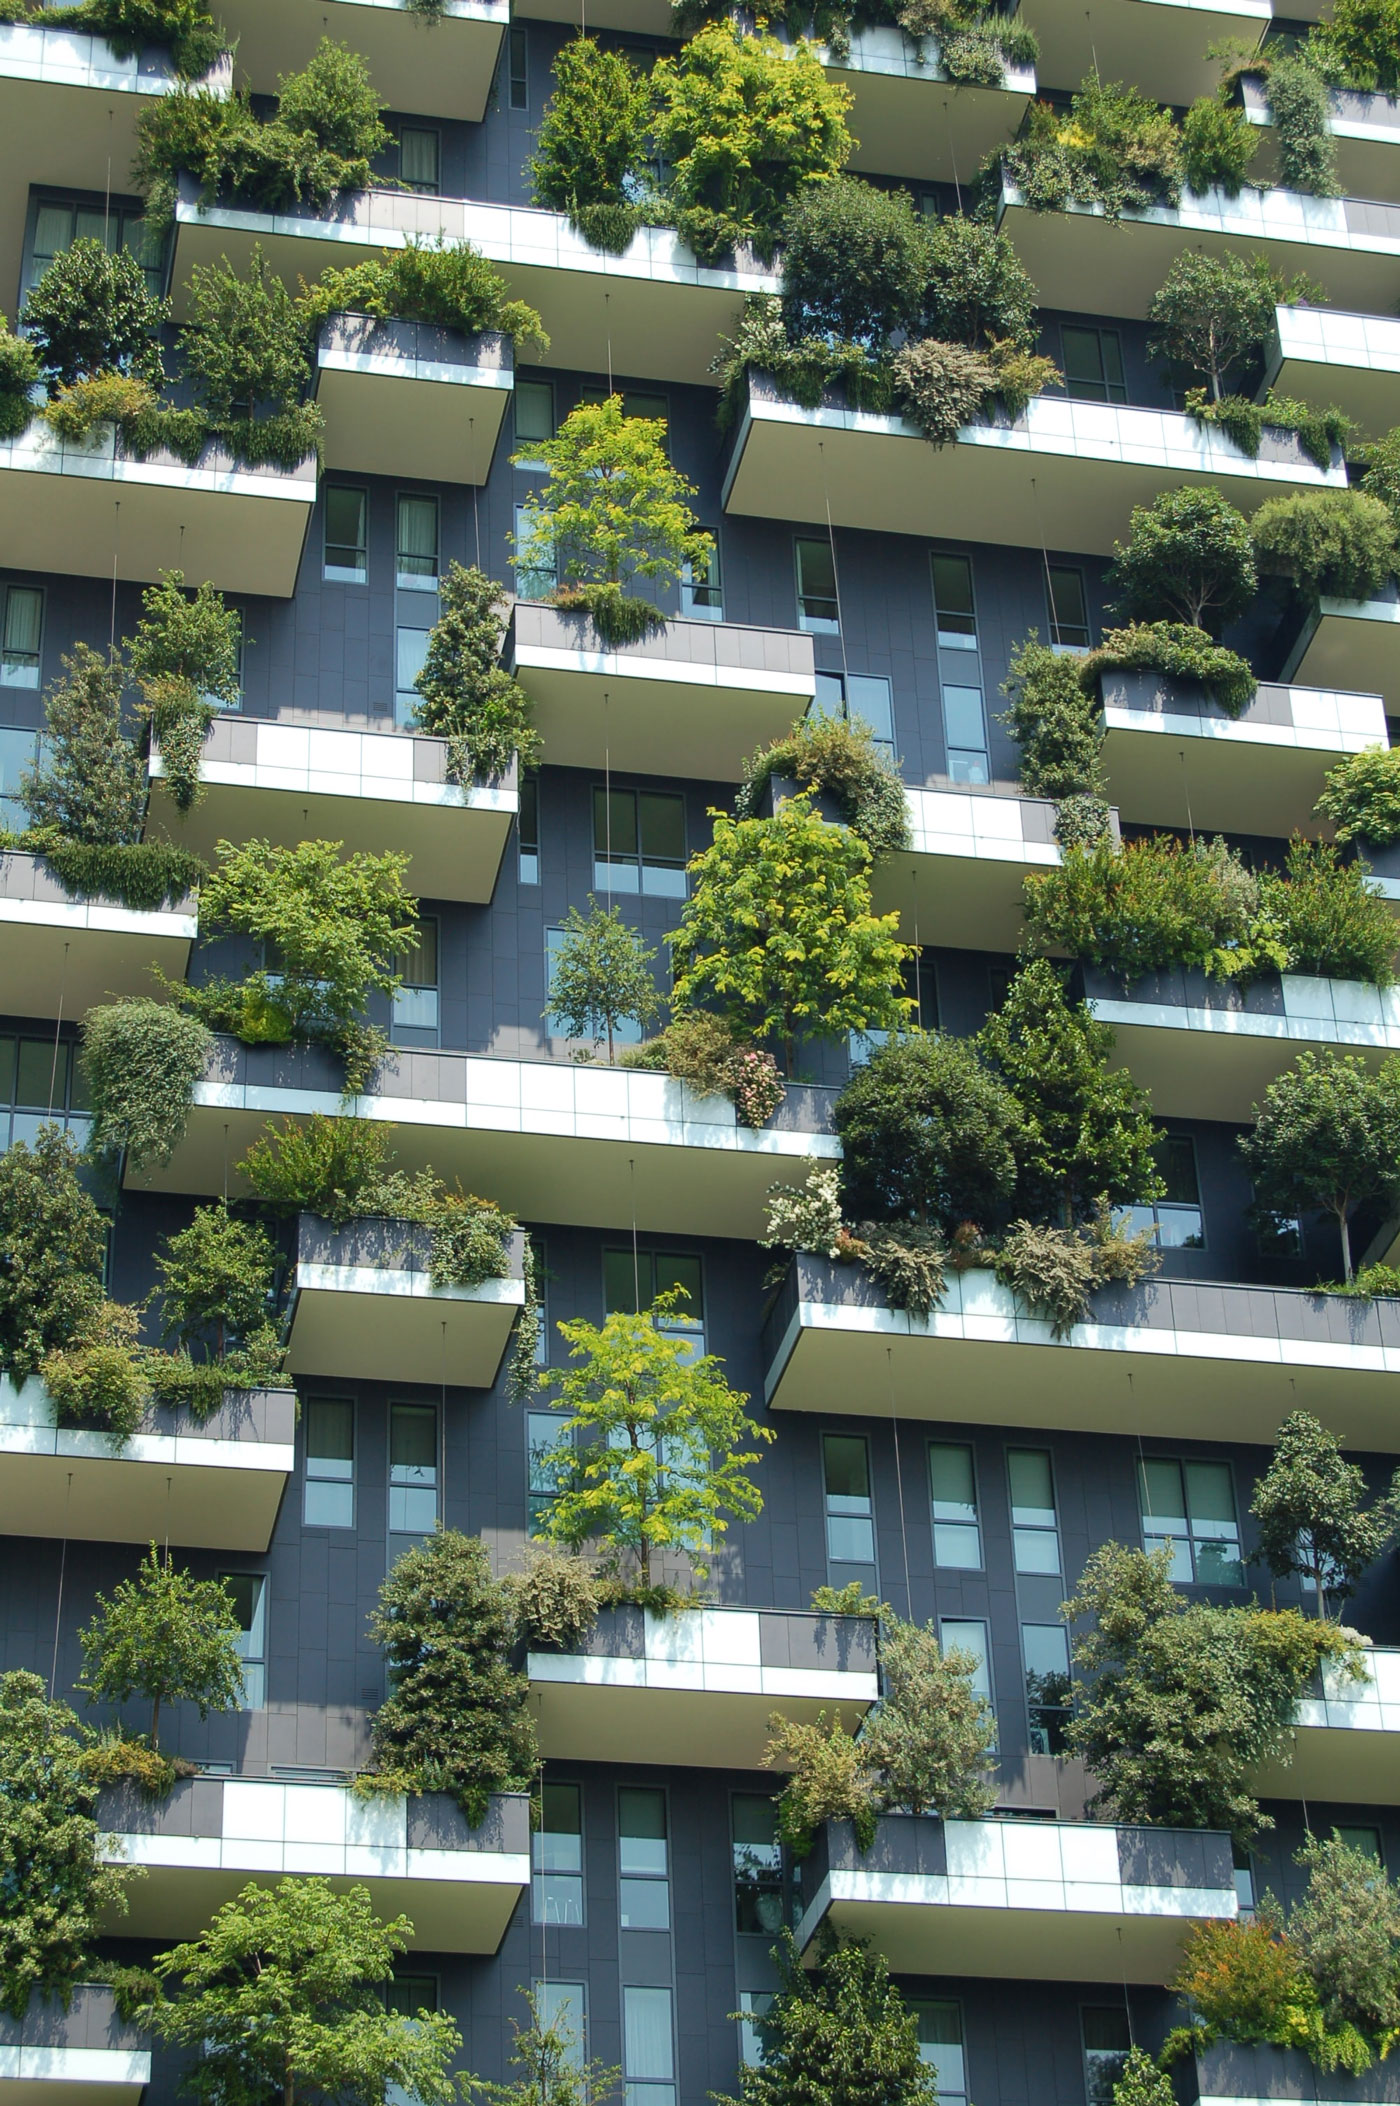 Vibia The Edit - Lighting That Looks to Nature: Biophilic Design - Bosco verticale